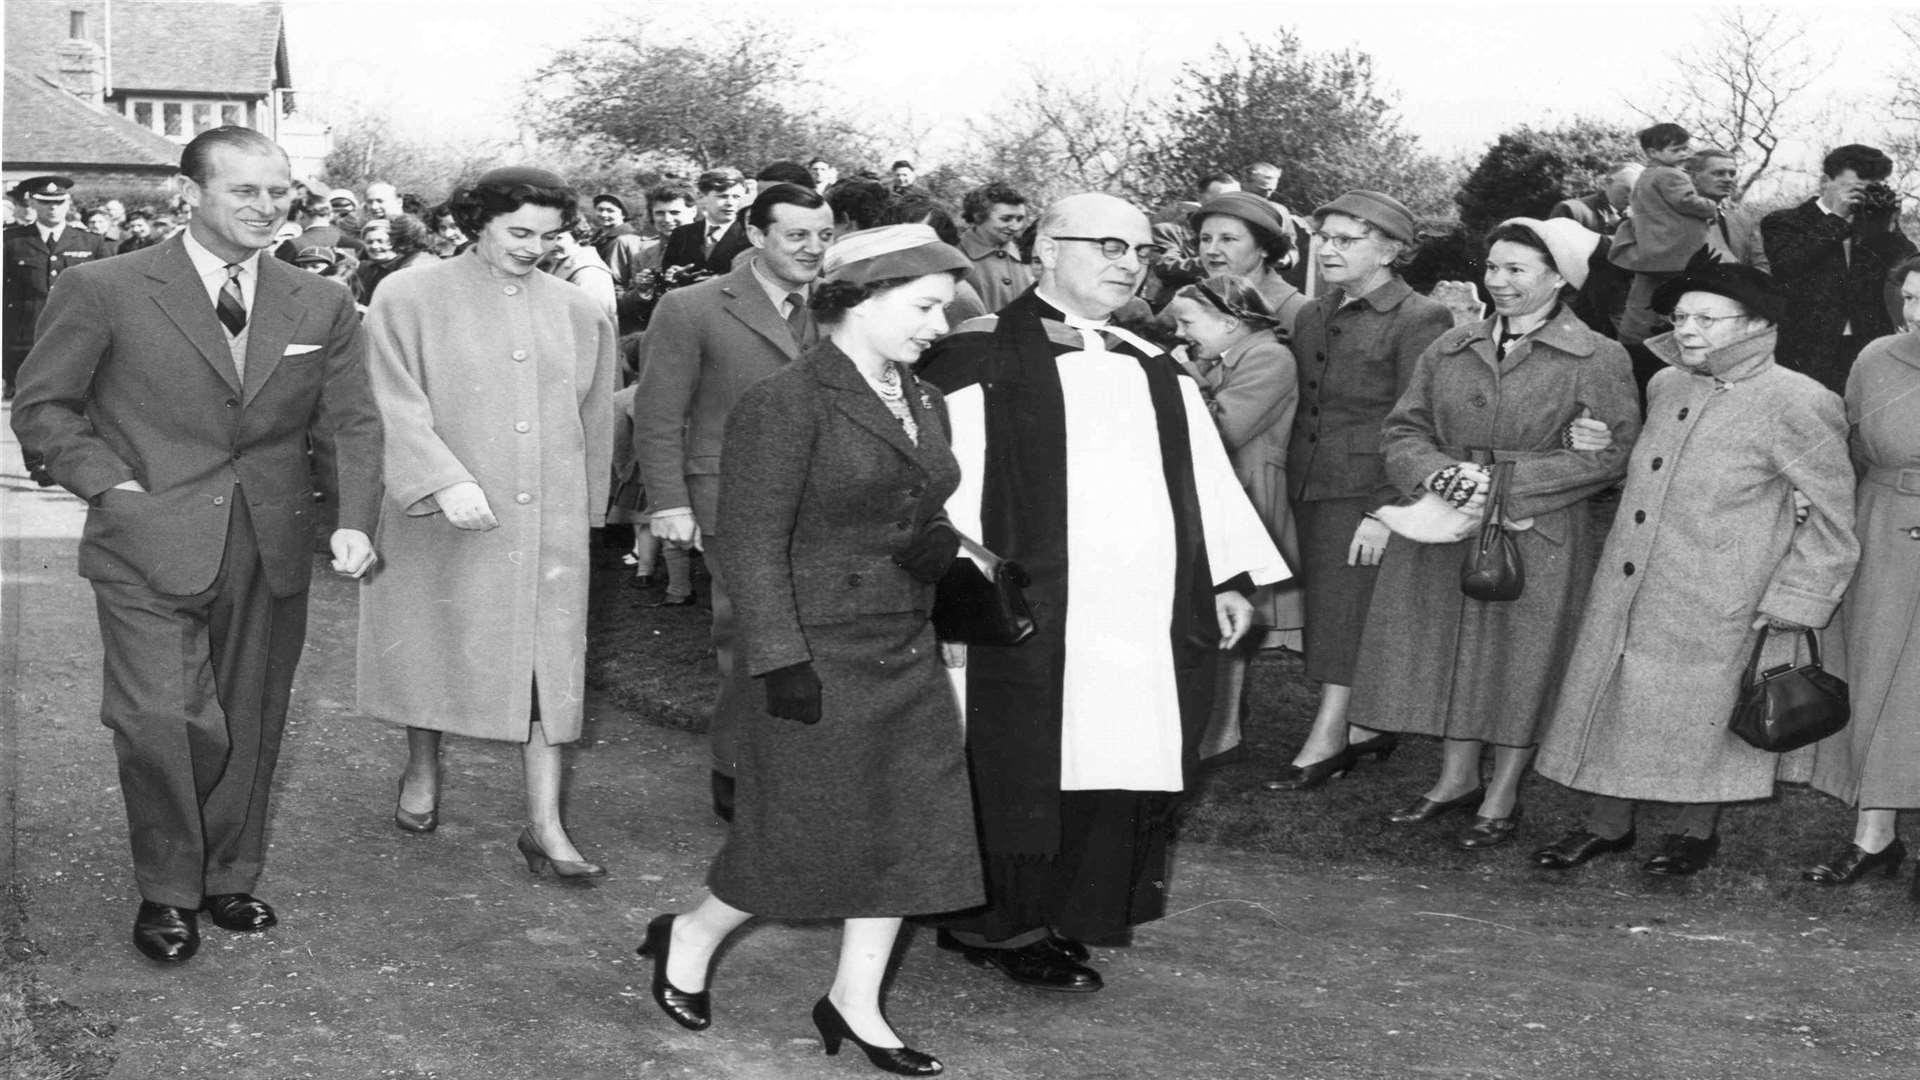 Crowds lined the church approach on April 5 1957 as Her Majesty The Queen and Prince Phillip joined Lord and Lady Brabourne for a service conducted by Rector, the Rev H McDonald at Mersham Parish church. Picture: "Images of Ashford" book by Mike Bennett